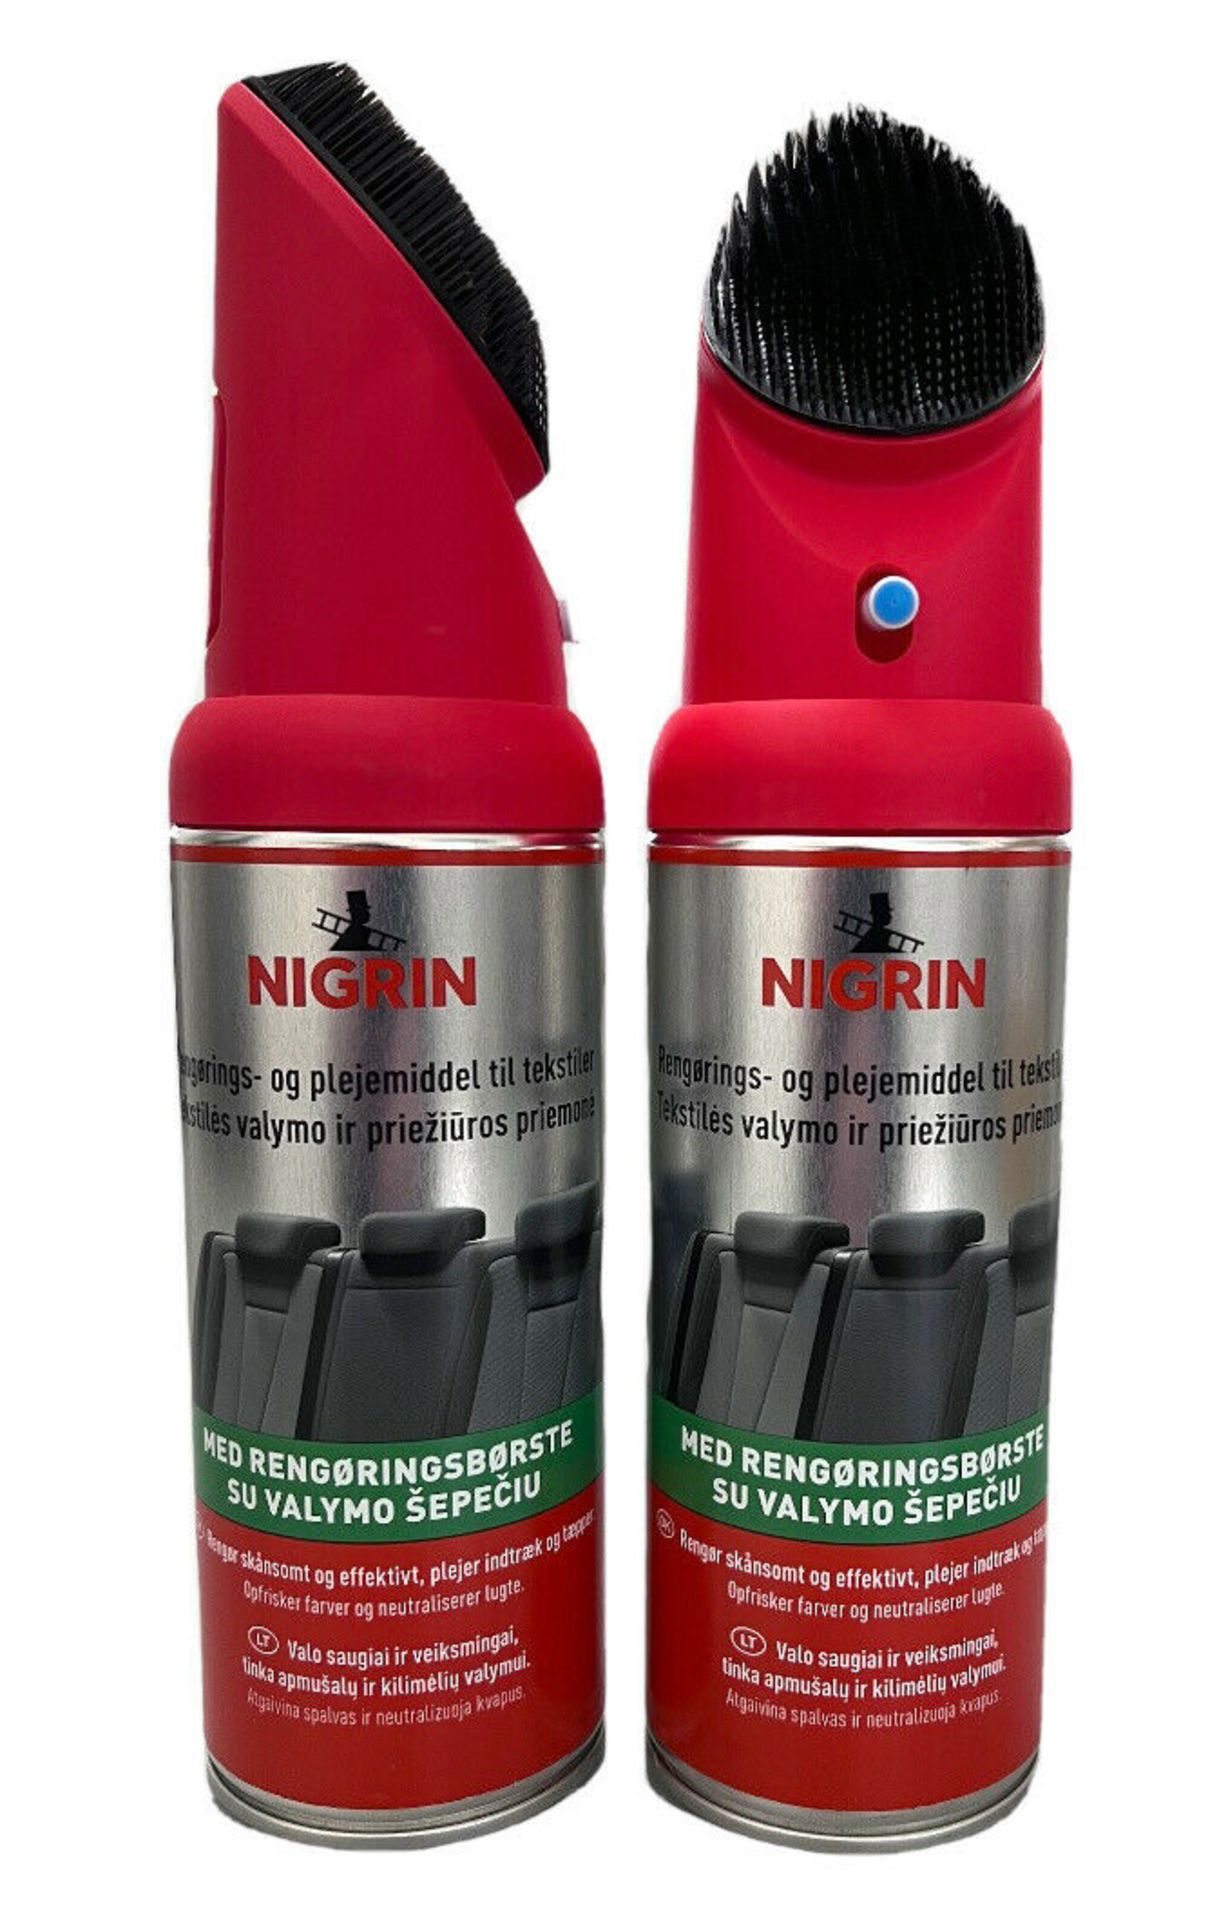 12 x Nigrin Car Upholstery/Textile Cleaner 400ml - eBay £7.99 ea. - Image 2 of 2